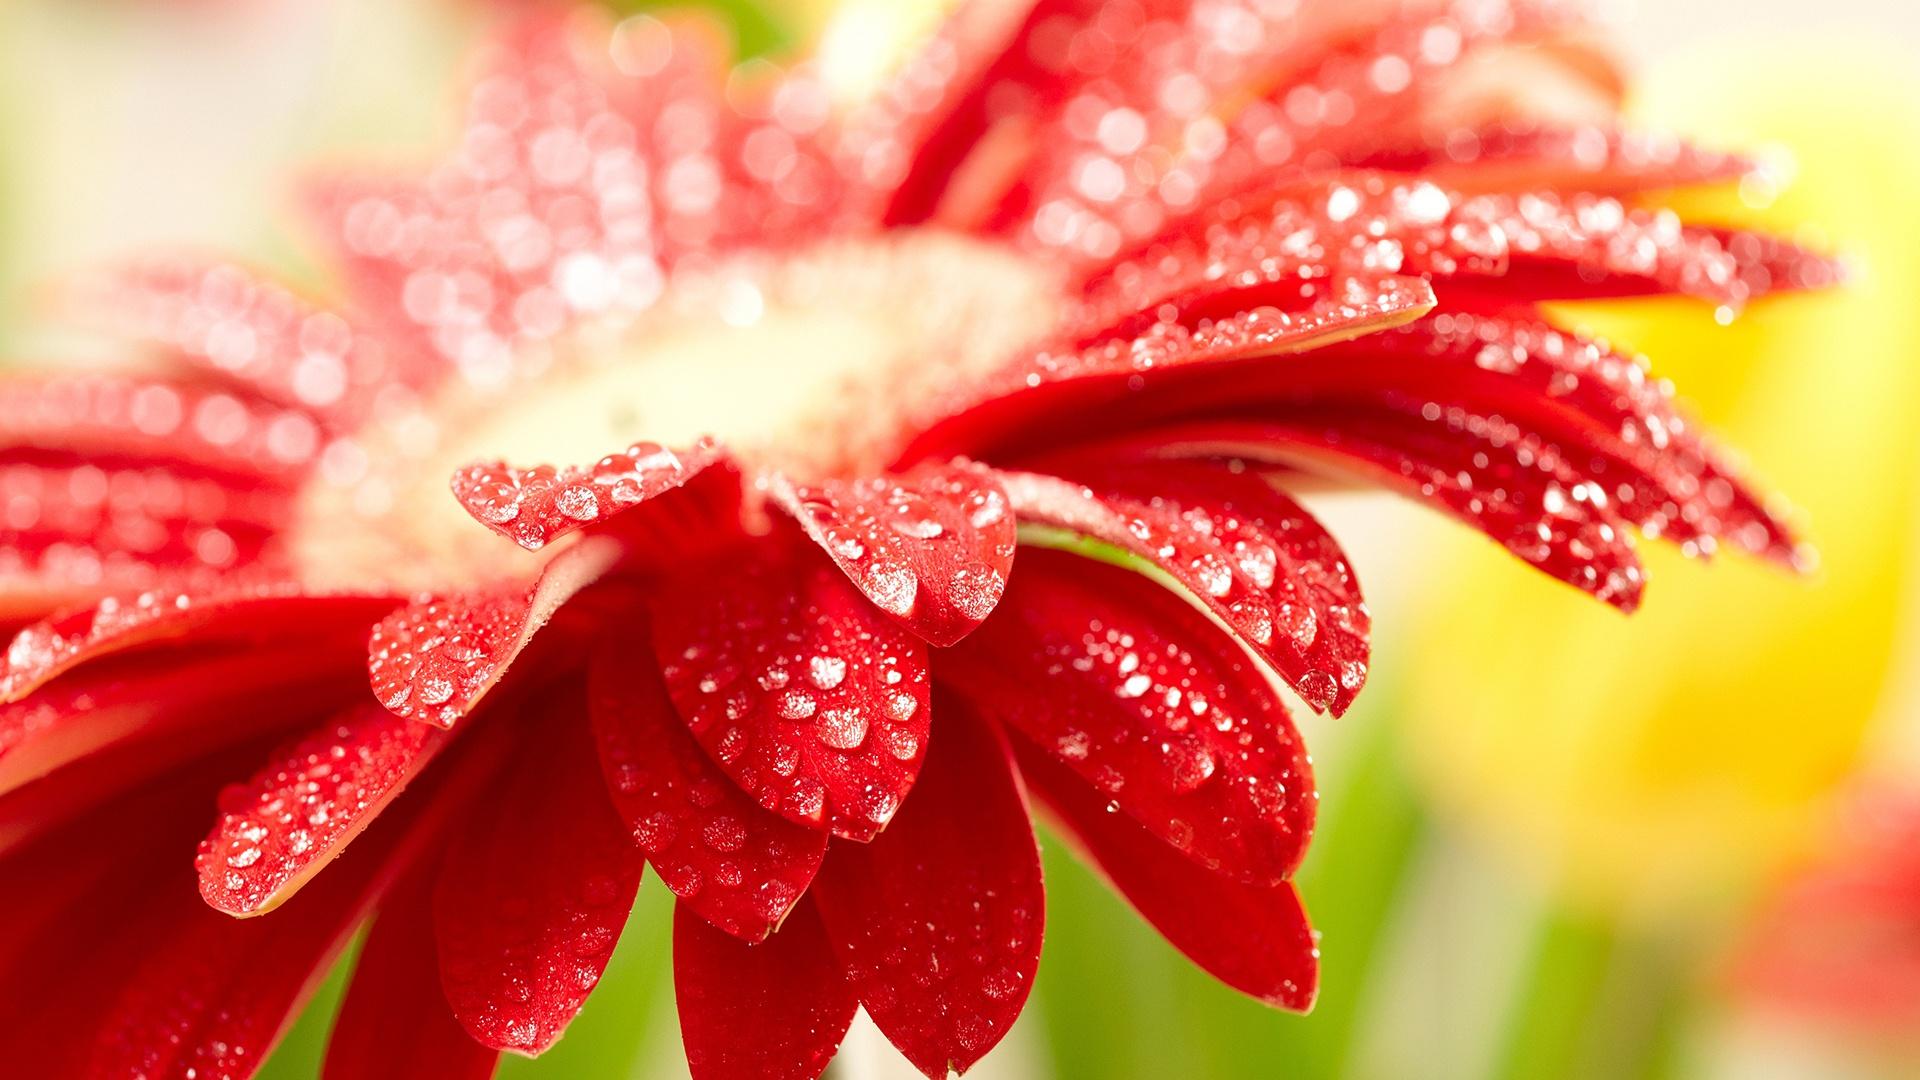 Amazing Red Flower Hd 101 Awesome Wallpaper To Download